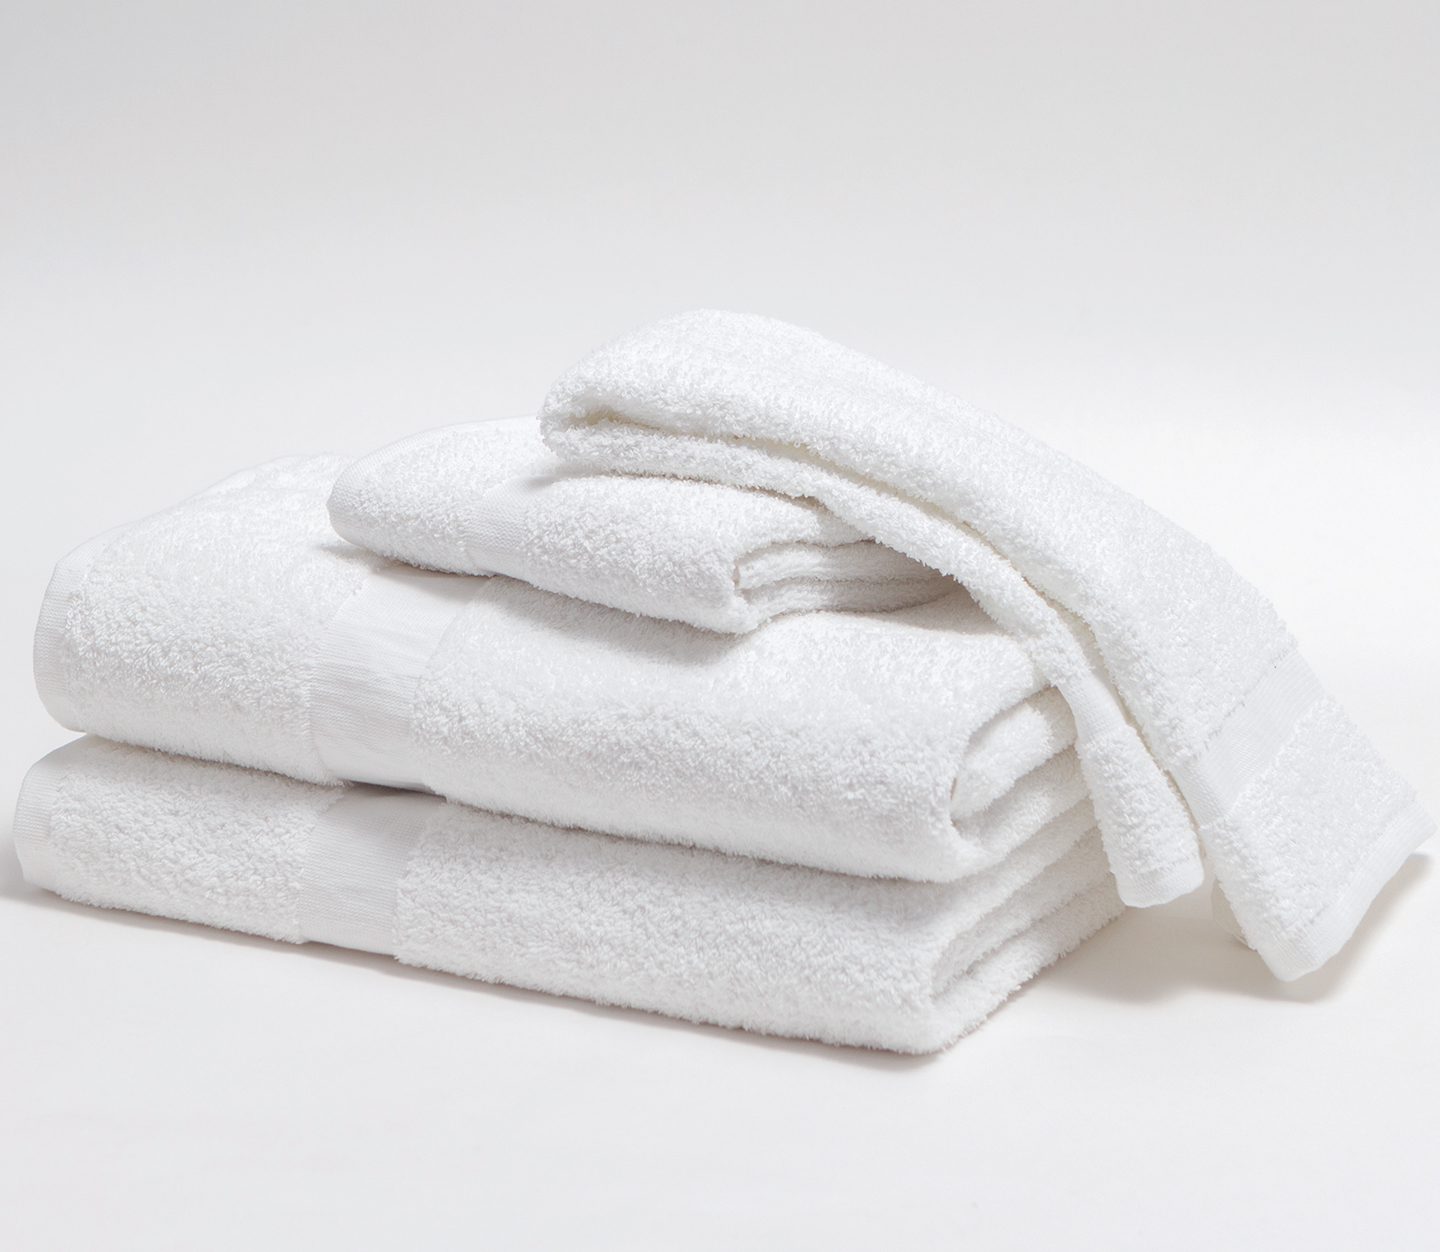 How to Buy Bath Towels: Expert Guide to Fabric, Absorbency & Stores